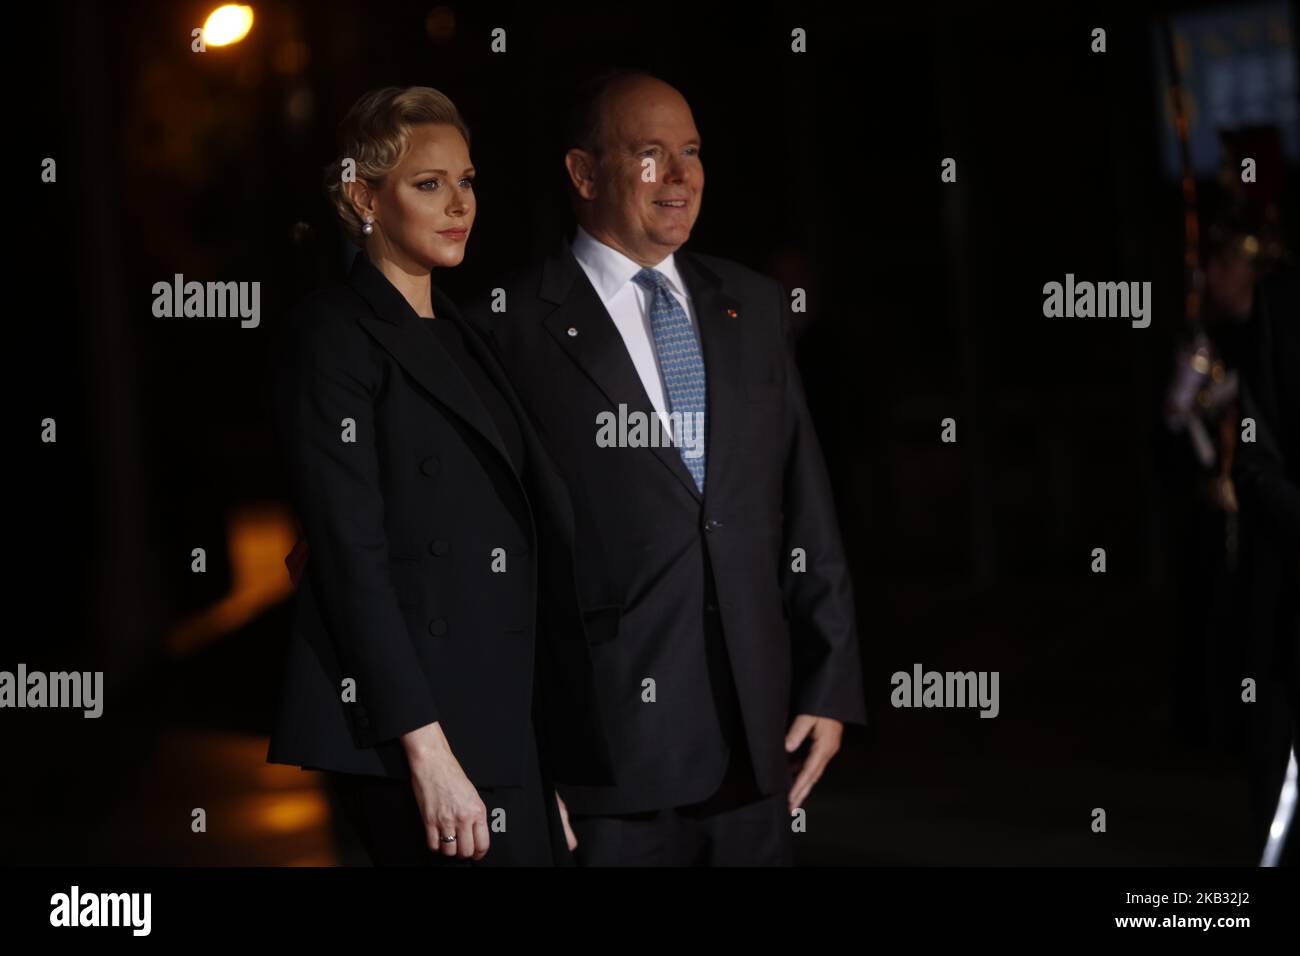 Albert II, Prince of Monaco and Charlene, Princess of Monaco arrive at the Musee d'Orsay in Paris on November 10, 2018 to attend a state diner and a visit of the Picasso exhibition as part of ceremonies marking the 100th anniversary of the 11 November 1918 armistice, ending World War I. (Photo by Mehdi Taamallah / NurPhoto) (Photo by Mehdi Taamallah/NurPhoto) Stock Photo